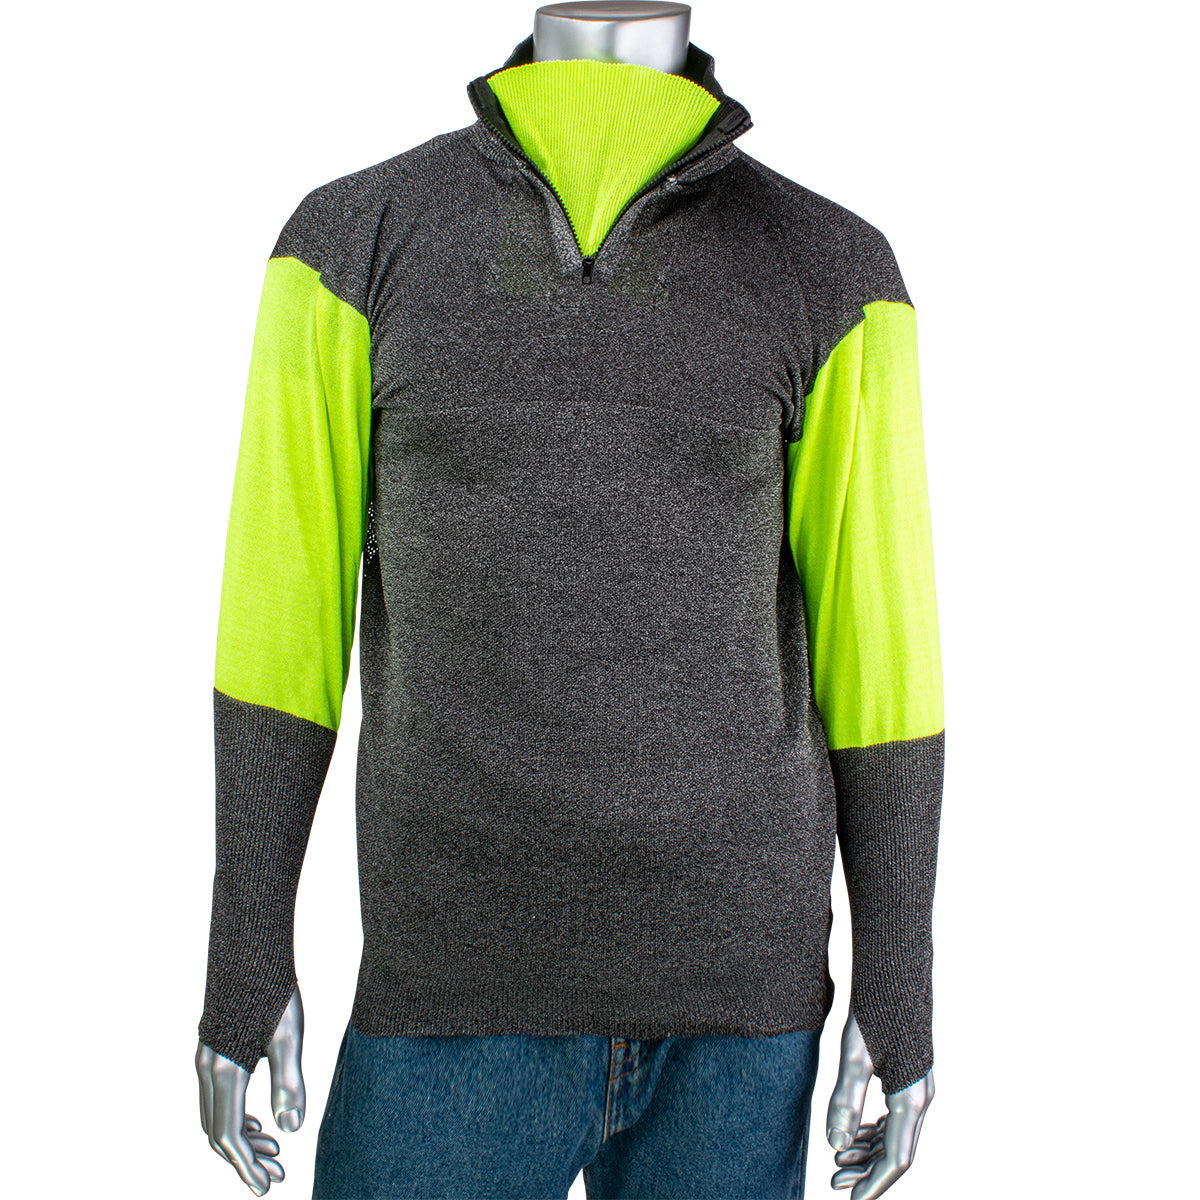 PIP PJG145-3CM-HVB-TH-4XL ATA Blended Cut Resistant 1/4 Zip Pullover with Hi-Vis Sleeves and Thumb Holes